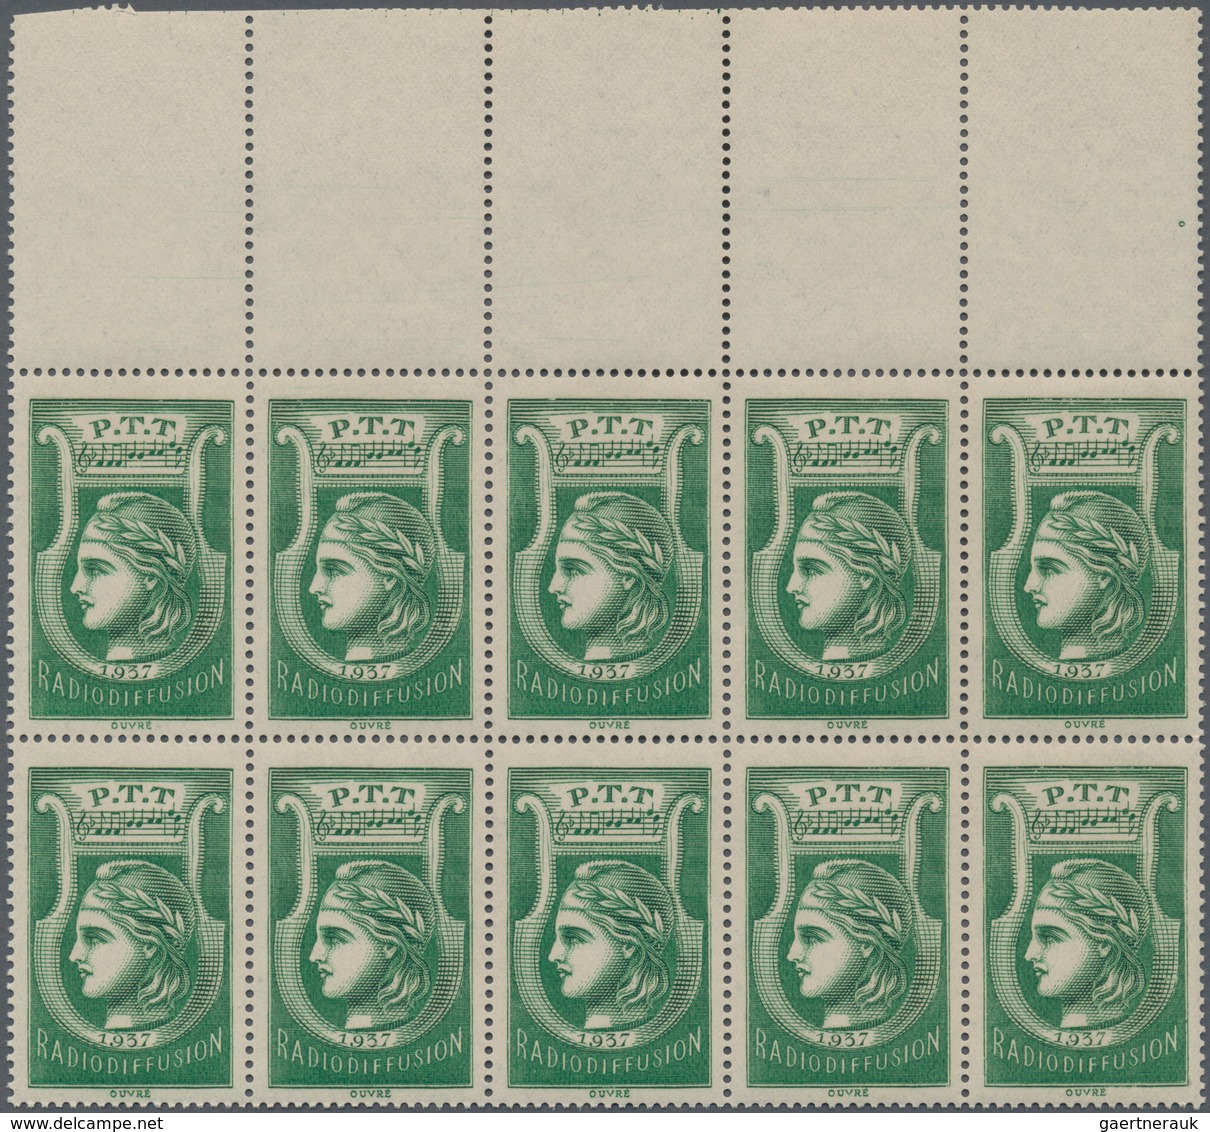 Frankreich - Portomarken: 1937, Radiodiffusion Stamp In Green, Lot Of 100 Stamps Within Multiples, M - 1960-.... Oblitérés